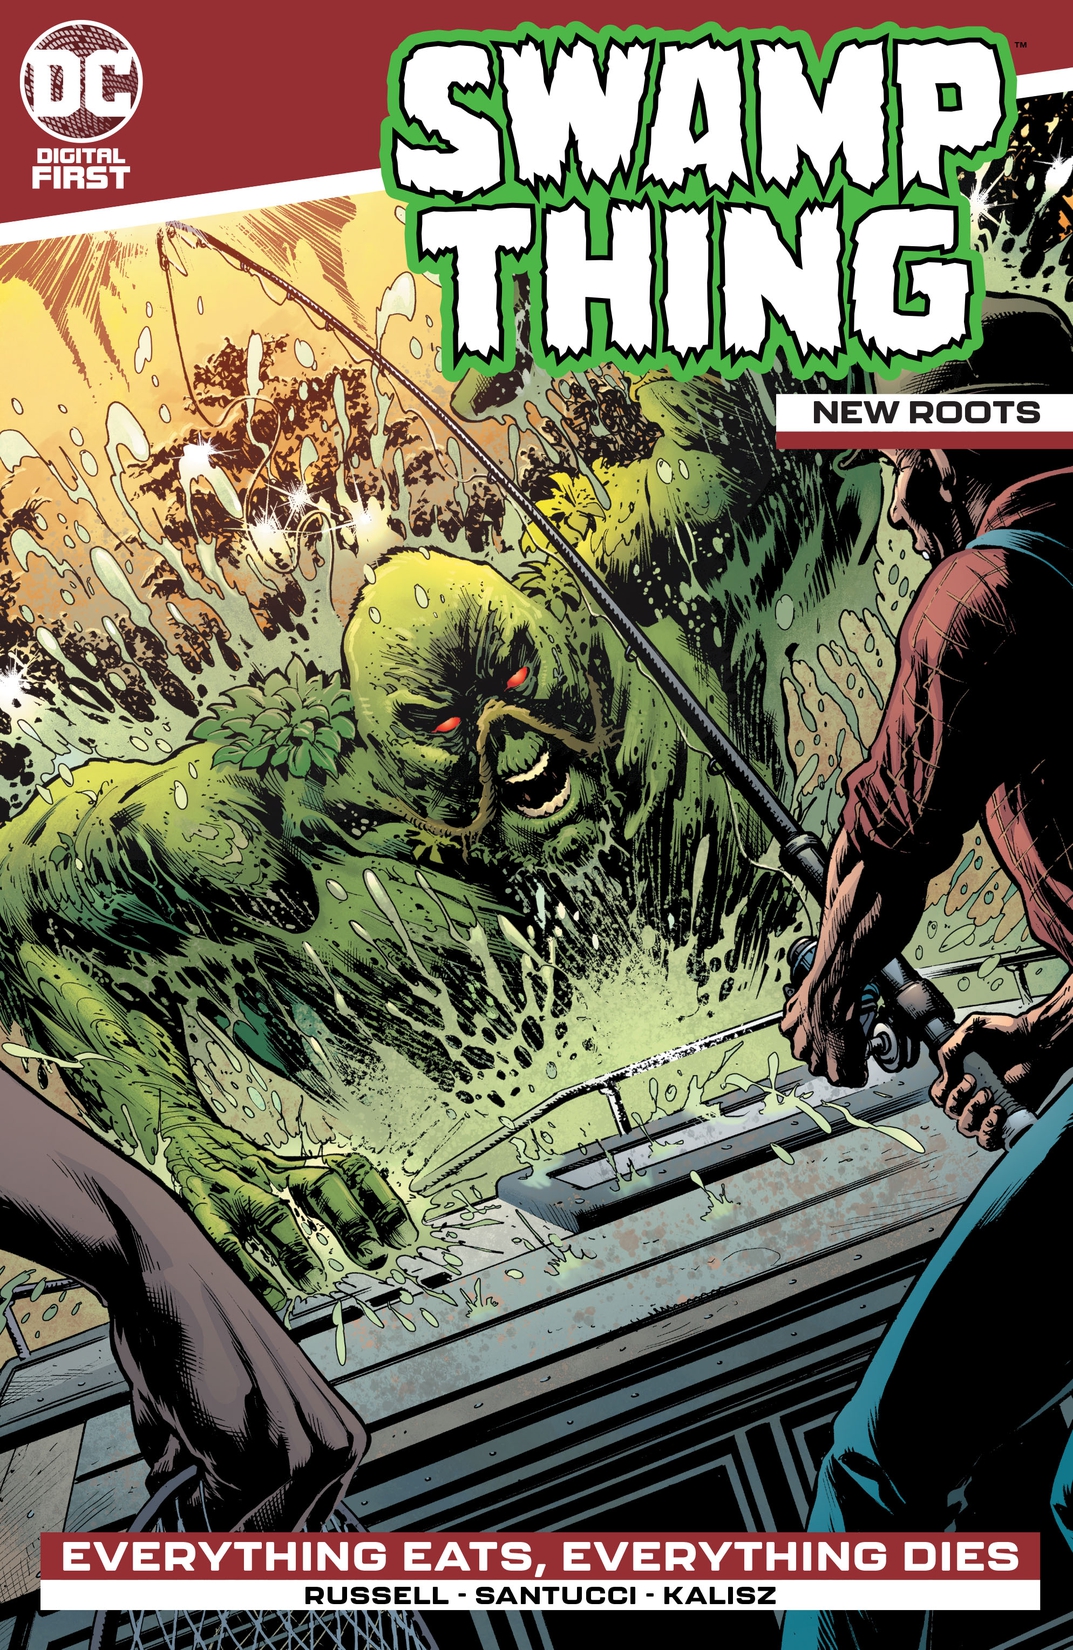 Swamp Thing: New Roots #2 preview images